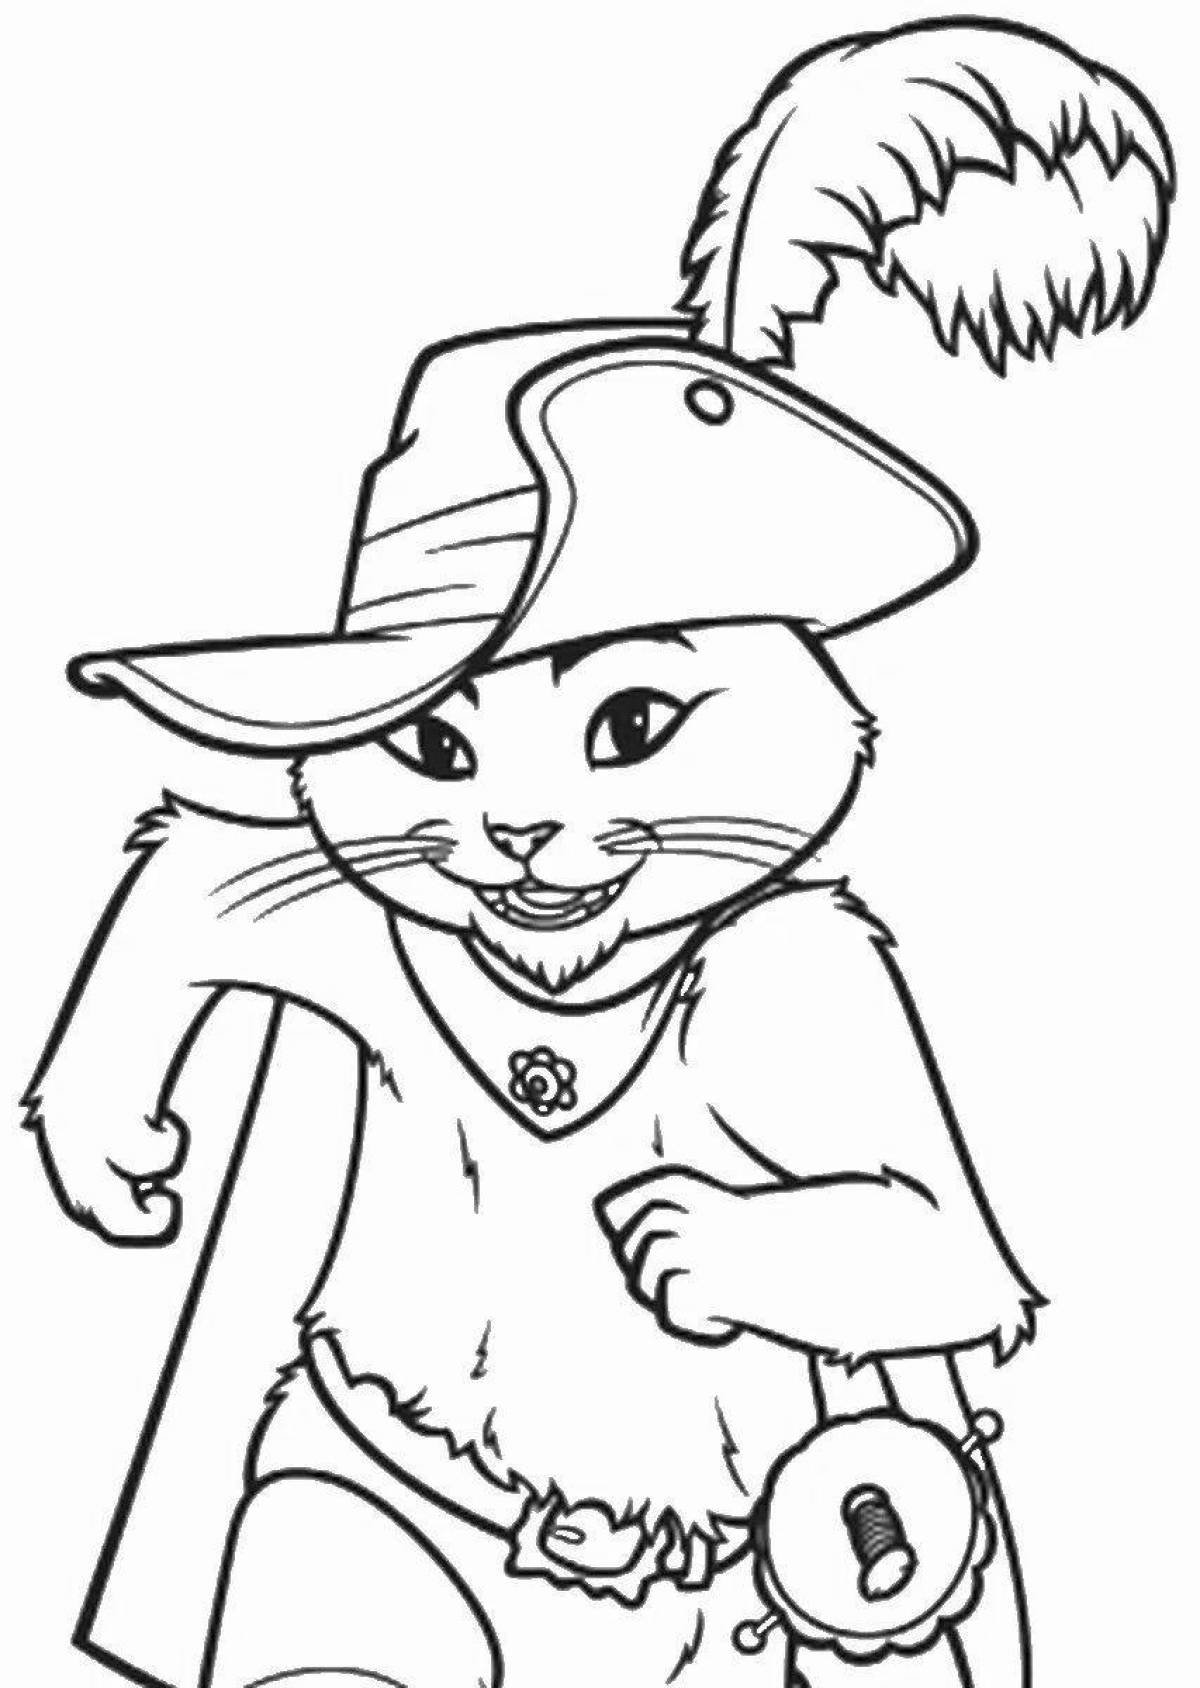 Coloring page dramatic puss in boots